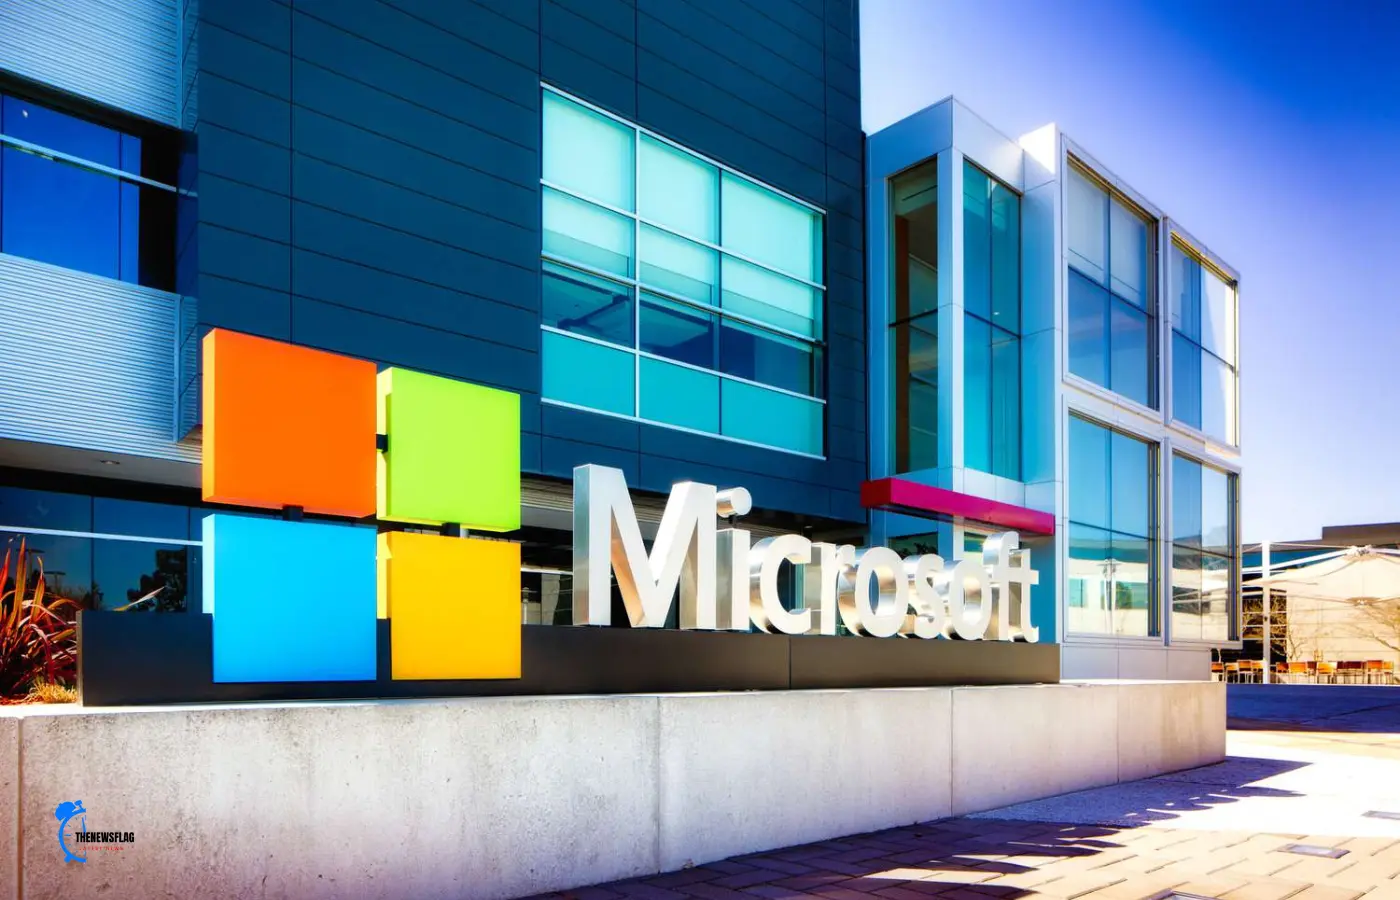 Microsoft claims that it has not been able to defeat state hackers from Russia